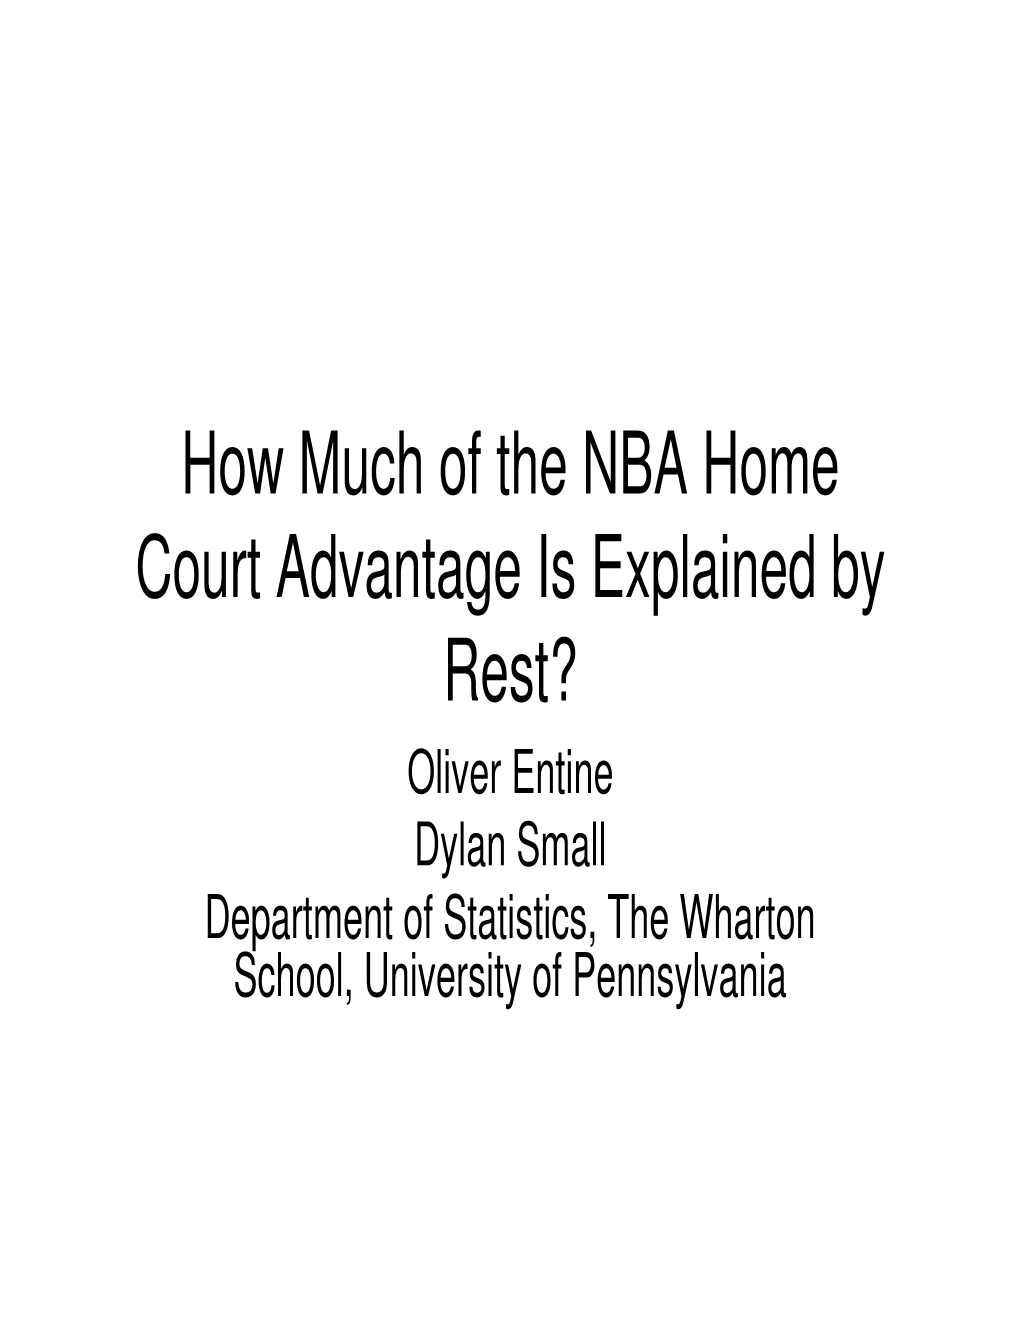 How Much of the NBA Home Court Advantage Is Explained by Rest?